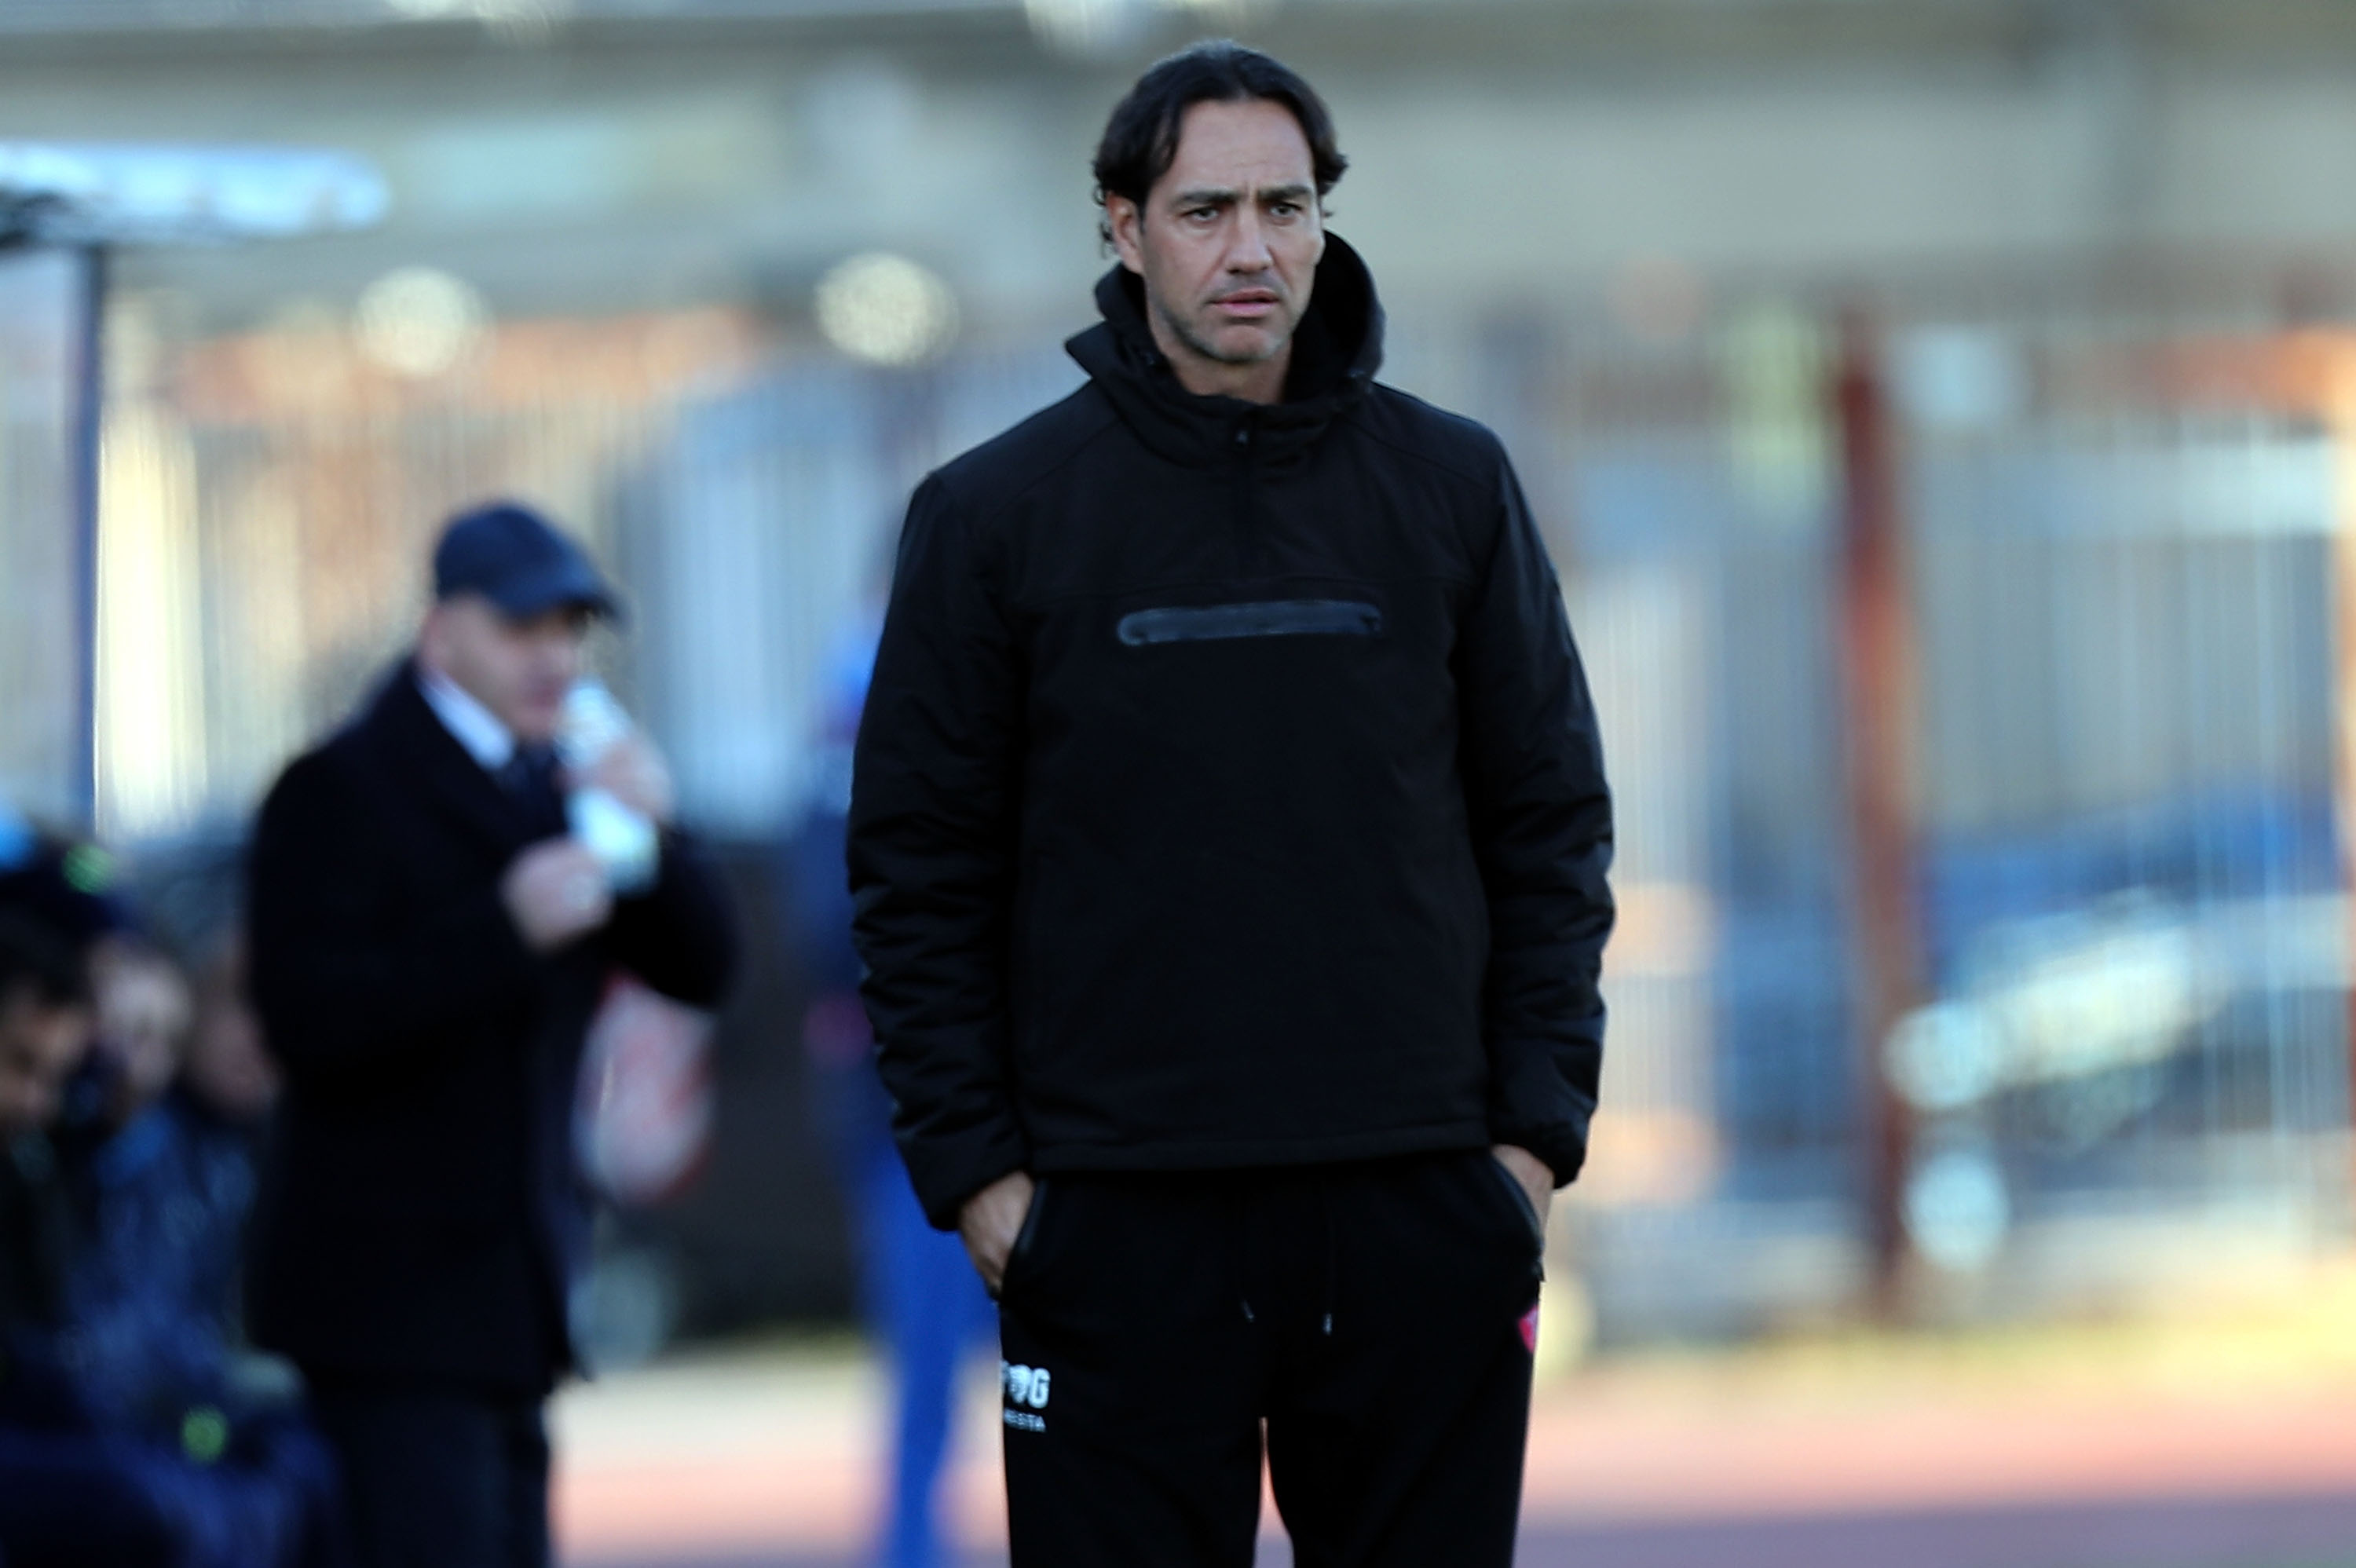 EMPOLI, ITALY - JANUARY 12: Alessandro Nesta manager of AC Perugia looks on during the friendly match between Empoli and Perugia on January 12, 2019 in Empoli, Italy.  (Photo by Gabriele Maltinti/Getty Images)